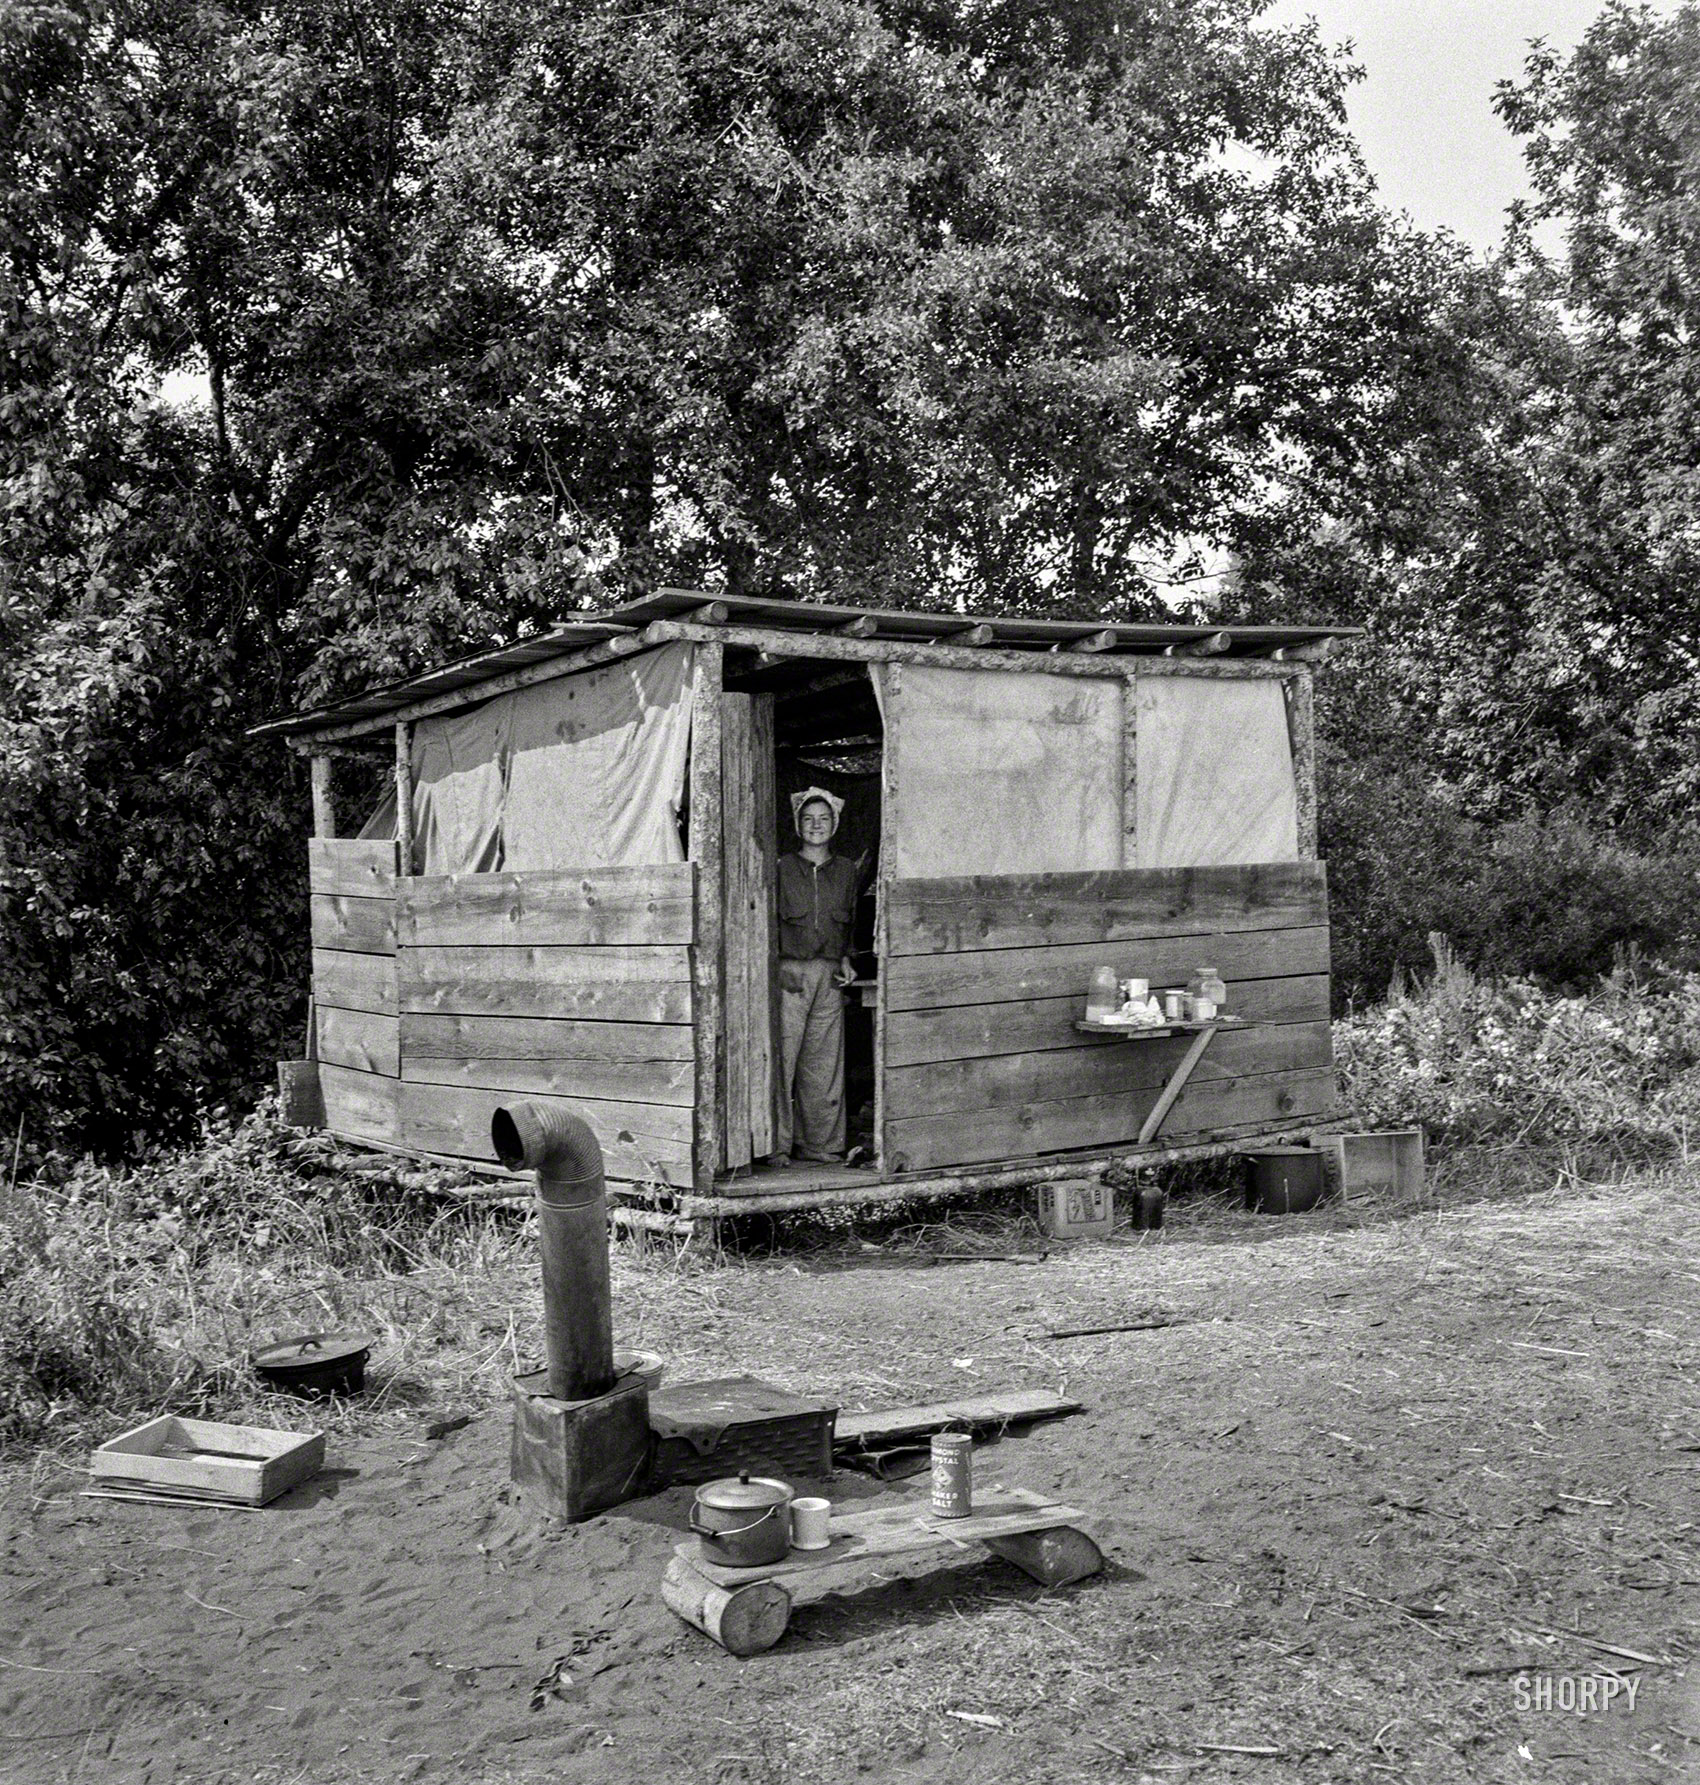 August 1939. "Josephine County, Oregon, near Grants Pass. A row of shelters like this for hop pickers' families." Medium format negative by Dorothea Lange for the Resettlement Administration. View full size.